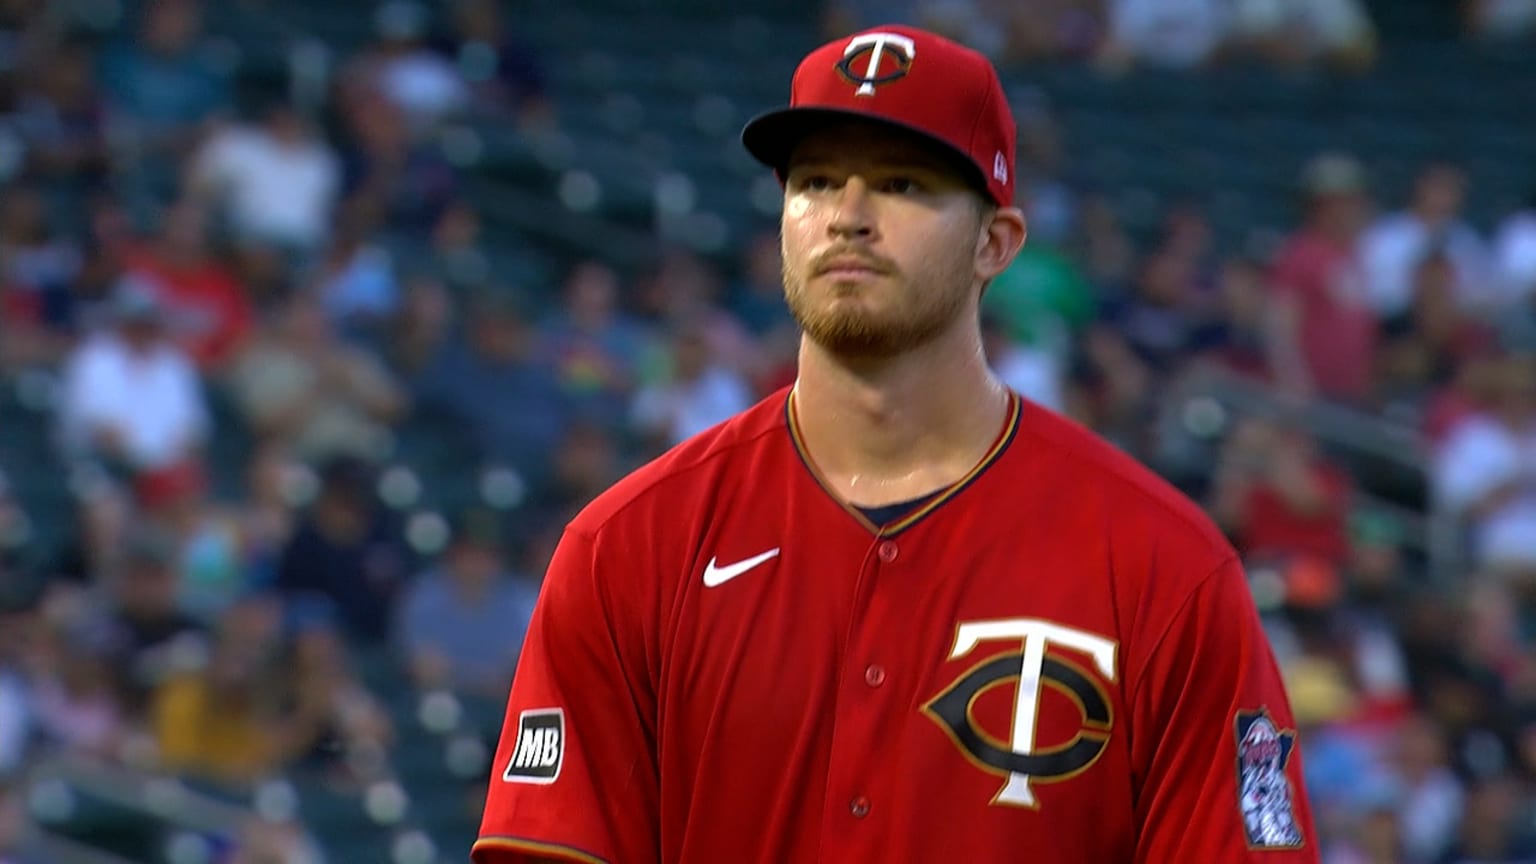 Bailey Ober strikes out seven | 06/11/2021 | Minnesota Twins